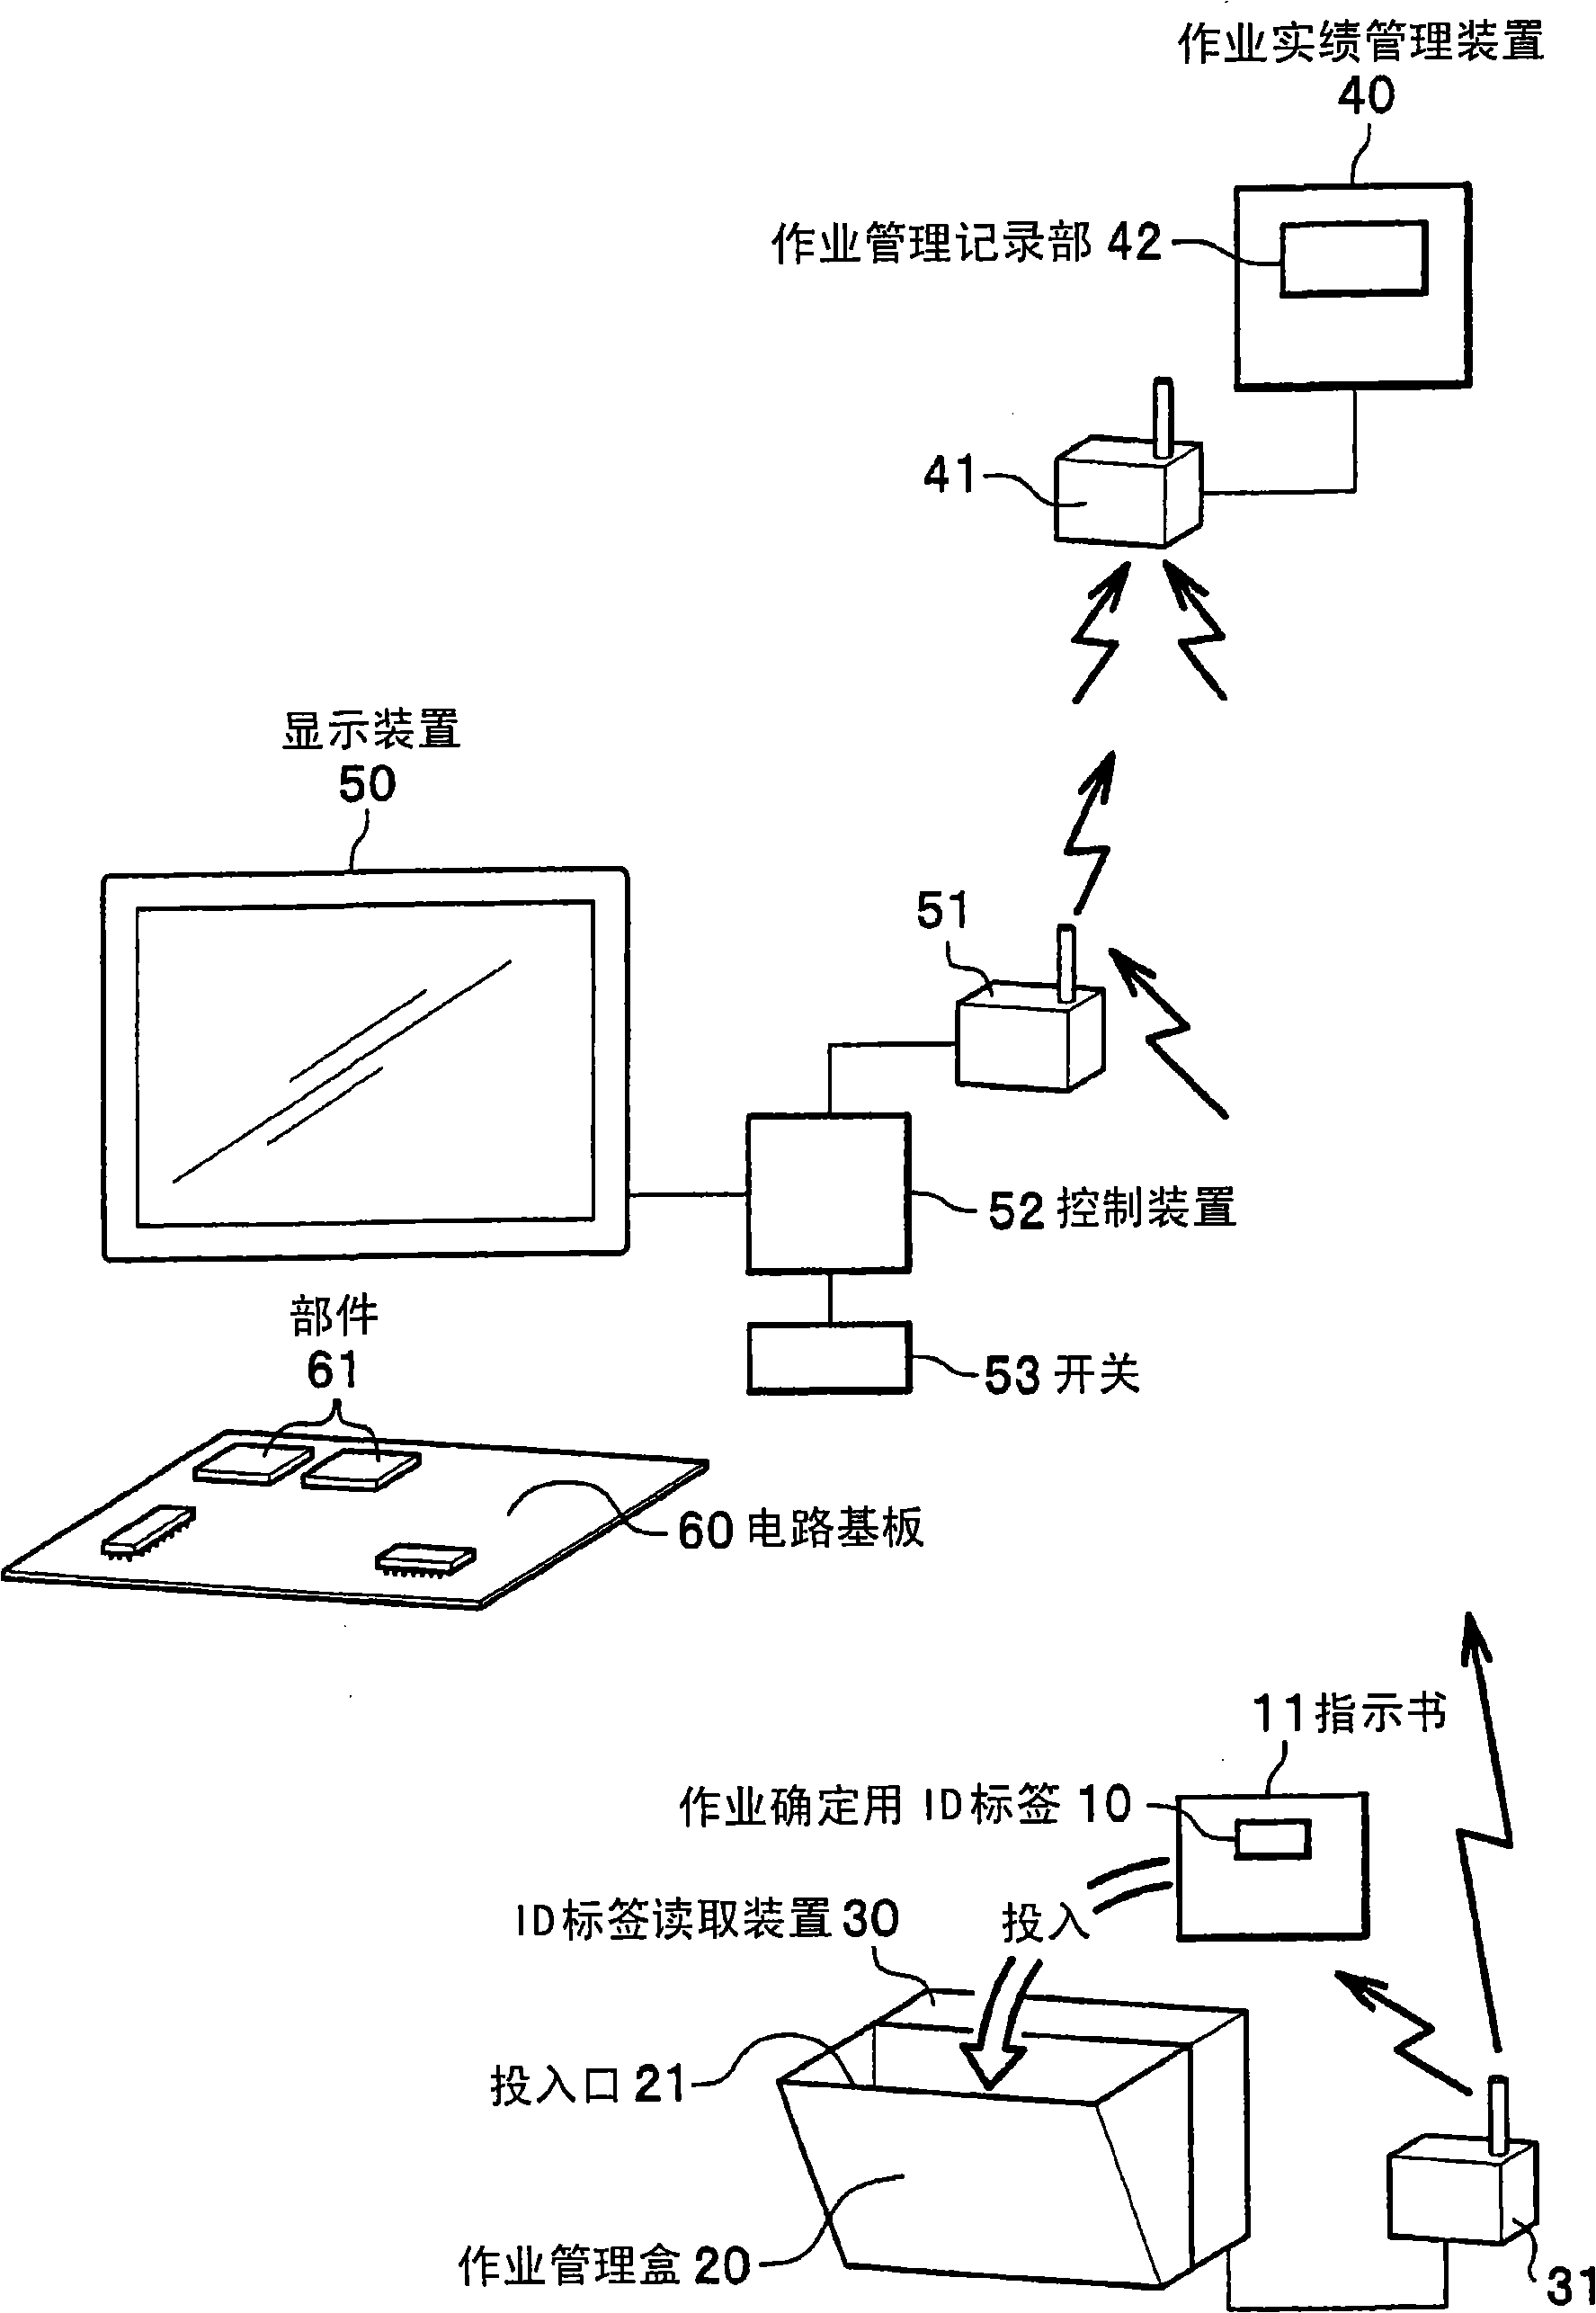 Device, system, method and program of workability management, system, and picking truck